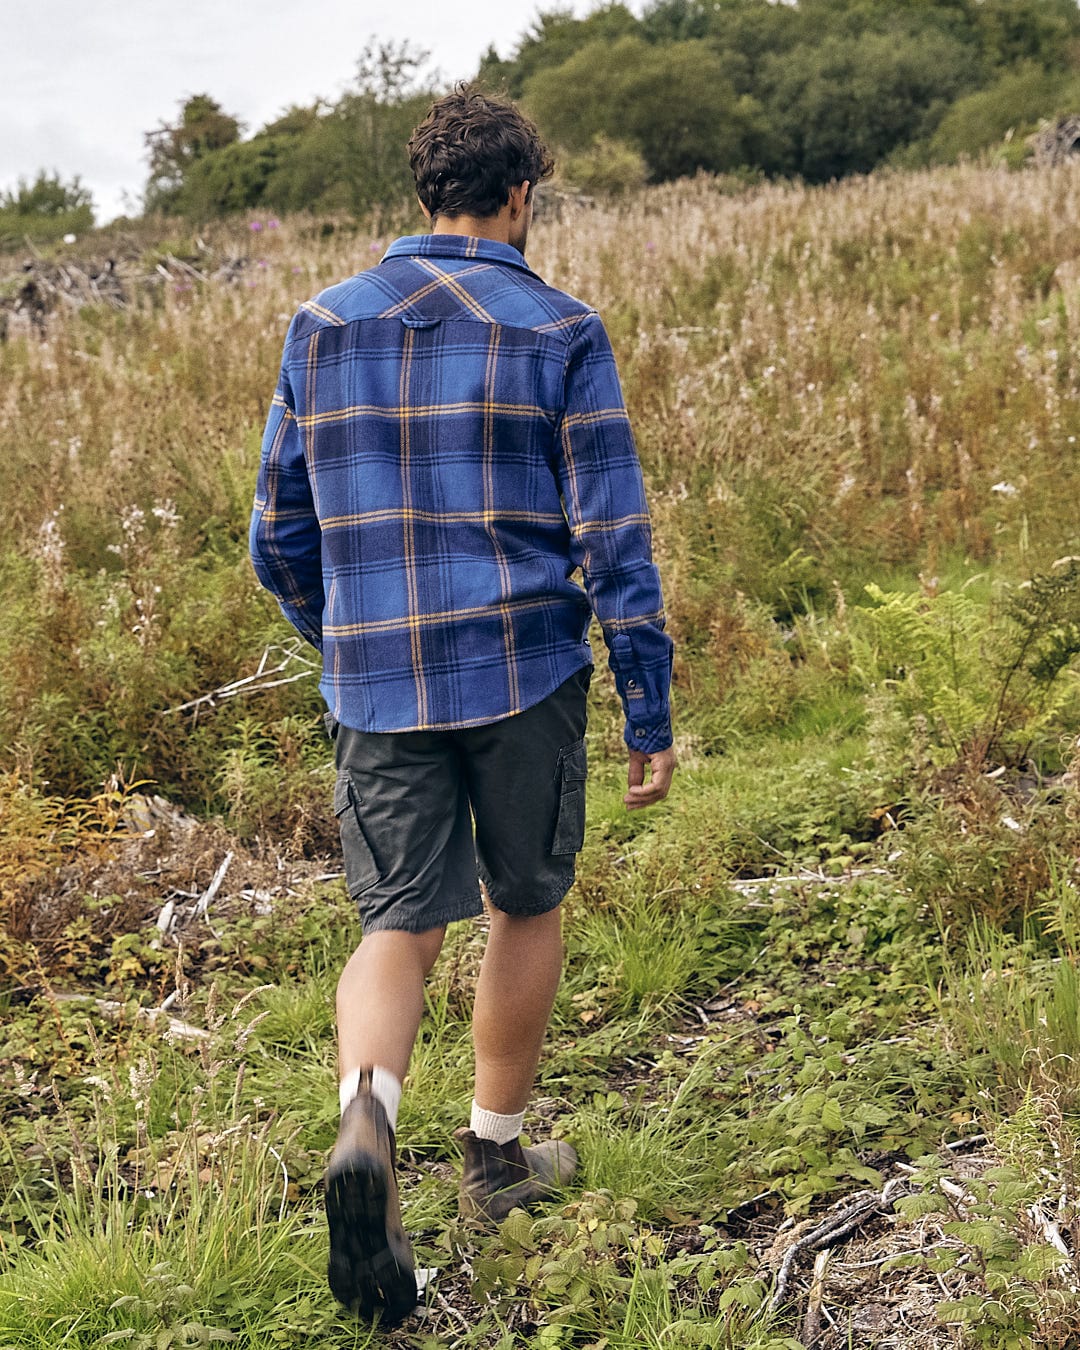 A man walking through a field in a Colter - Mens Hooded Shirt - Blue made of high quality fabric by Saltrock.